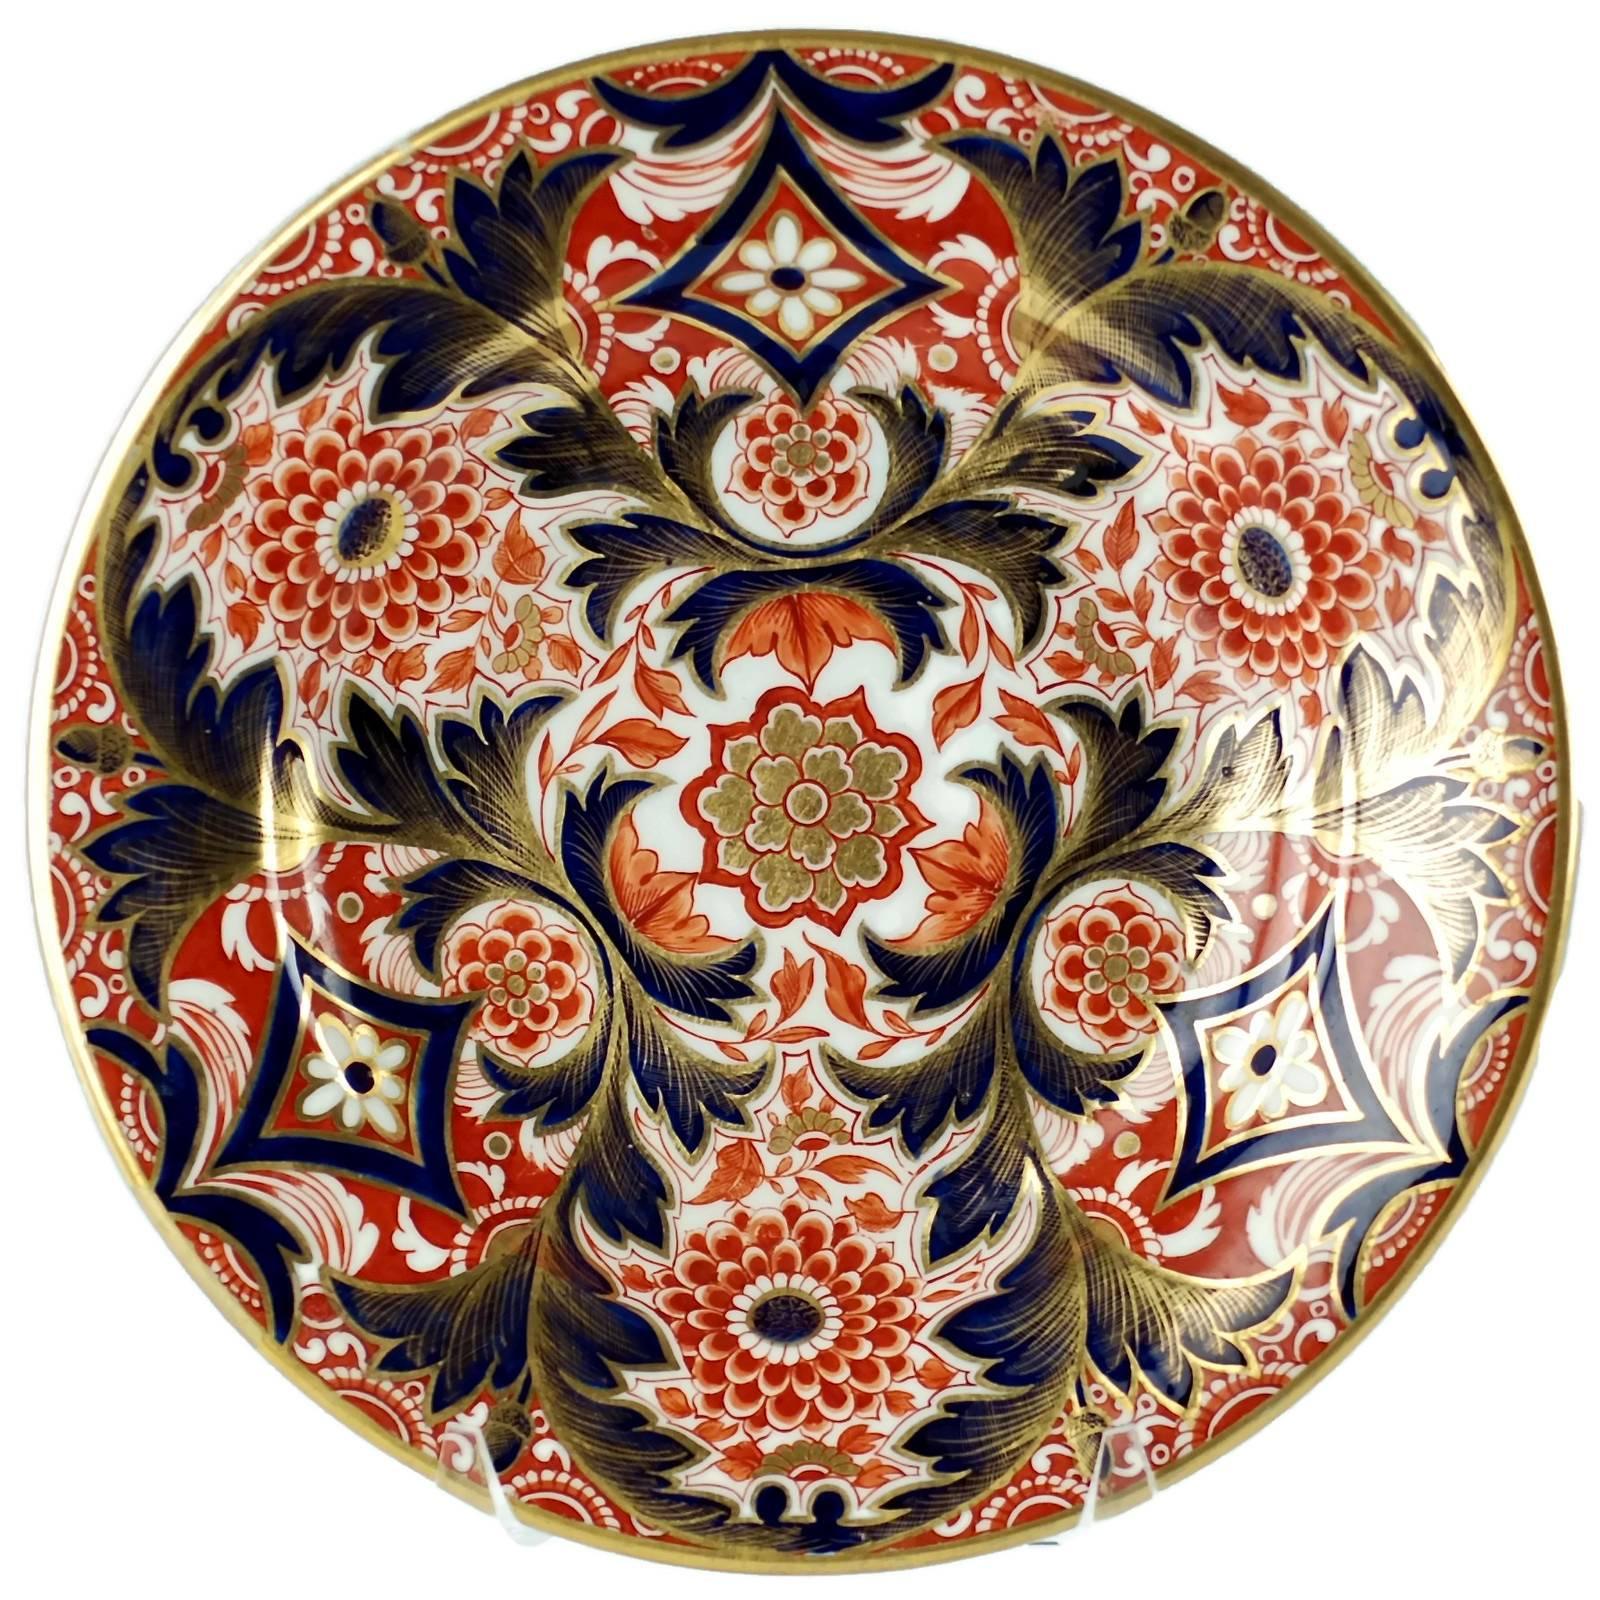 These English porcelain plates are decorated in an ornate Imari pattern and were made by Derby at their Nottingham Road factory, which was in operation from 1756-1848. The manufactory was granted the right by George II to use the crown as part of